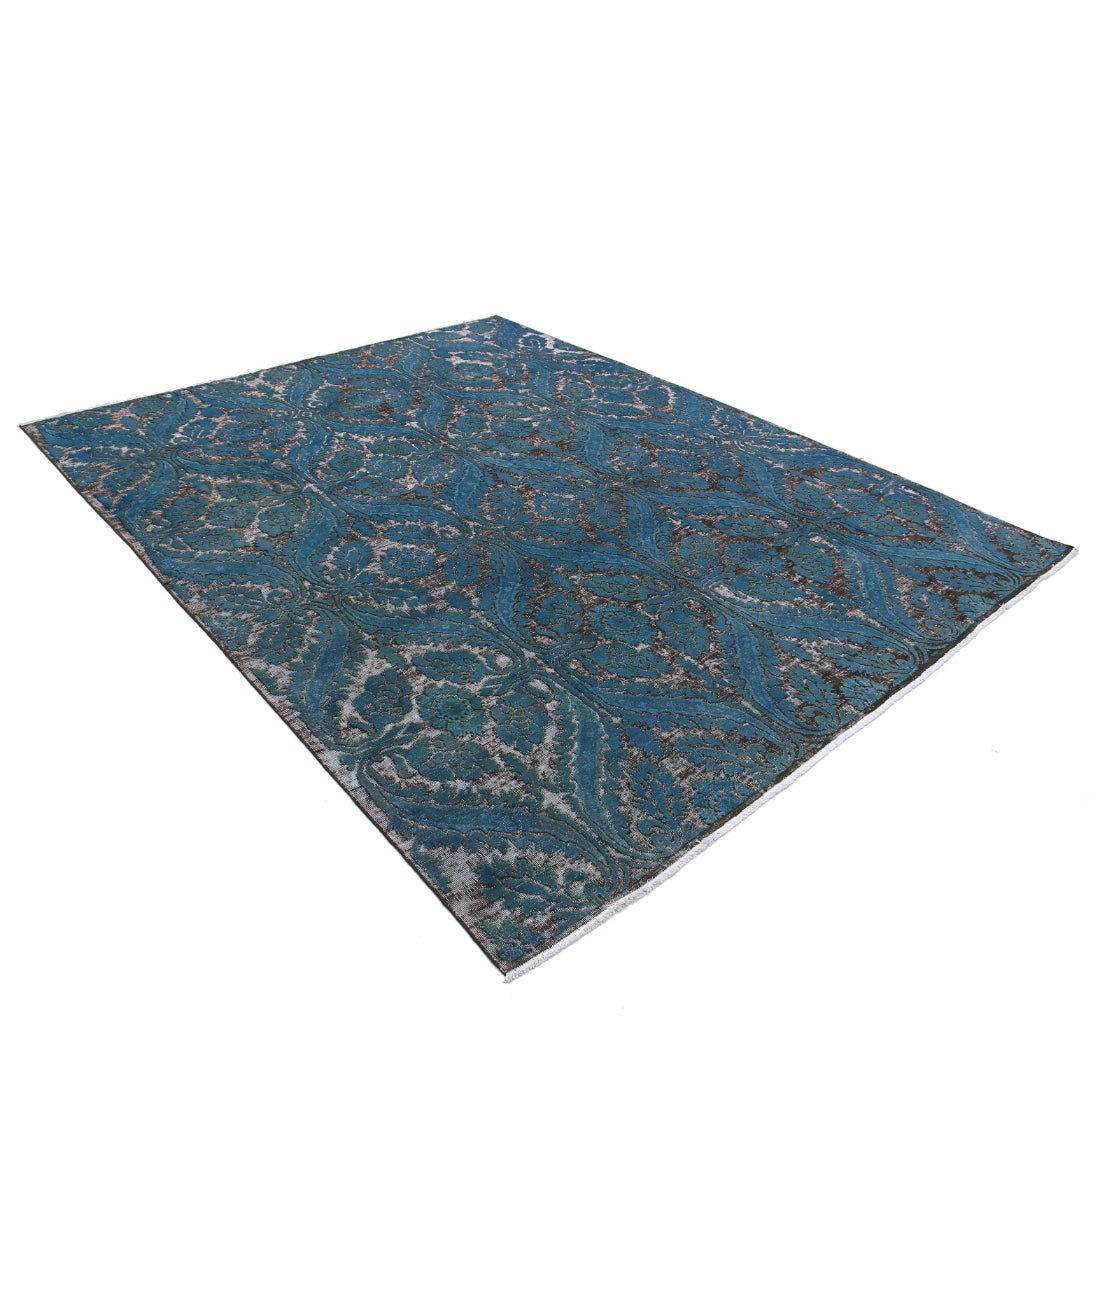 Hand Knotted Onyx Wool Rug - 7'11'' x 9'11'' 7'11'' x 9'11'' (238 X 298) / Blue / Blue